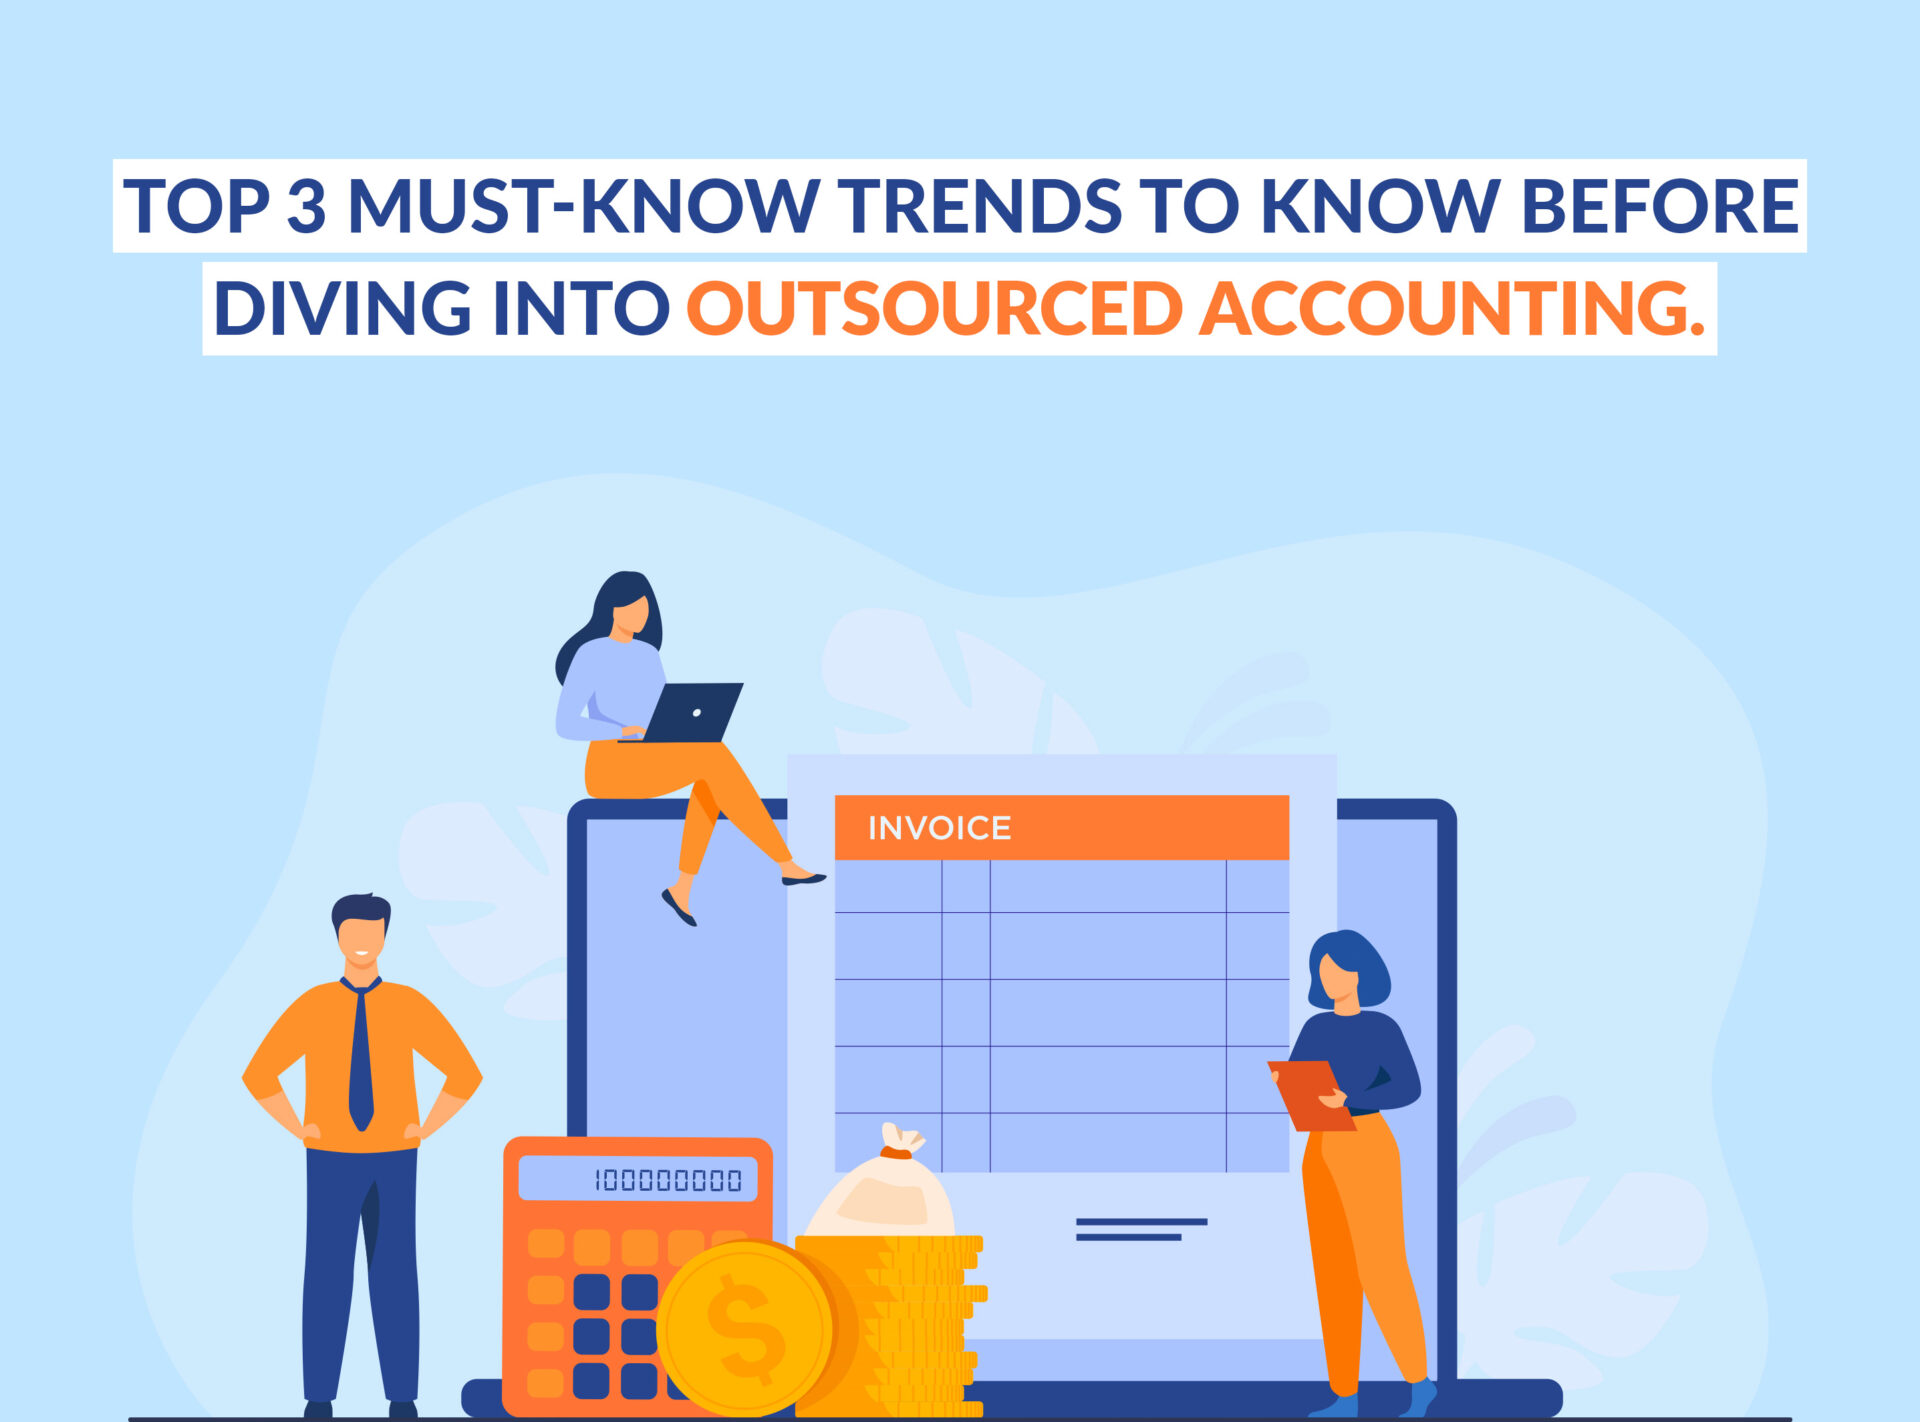 Top 3 Must-Know Trends Before Diving into Outsourced Accounting